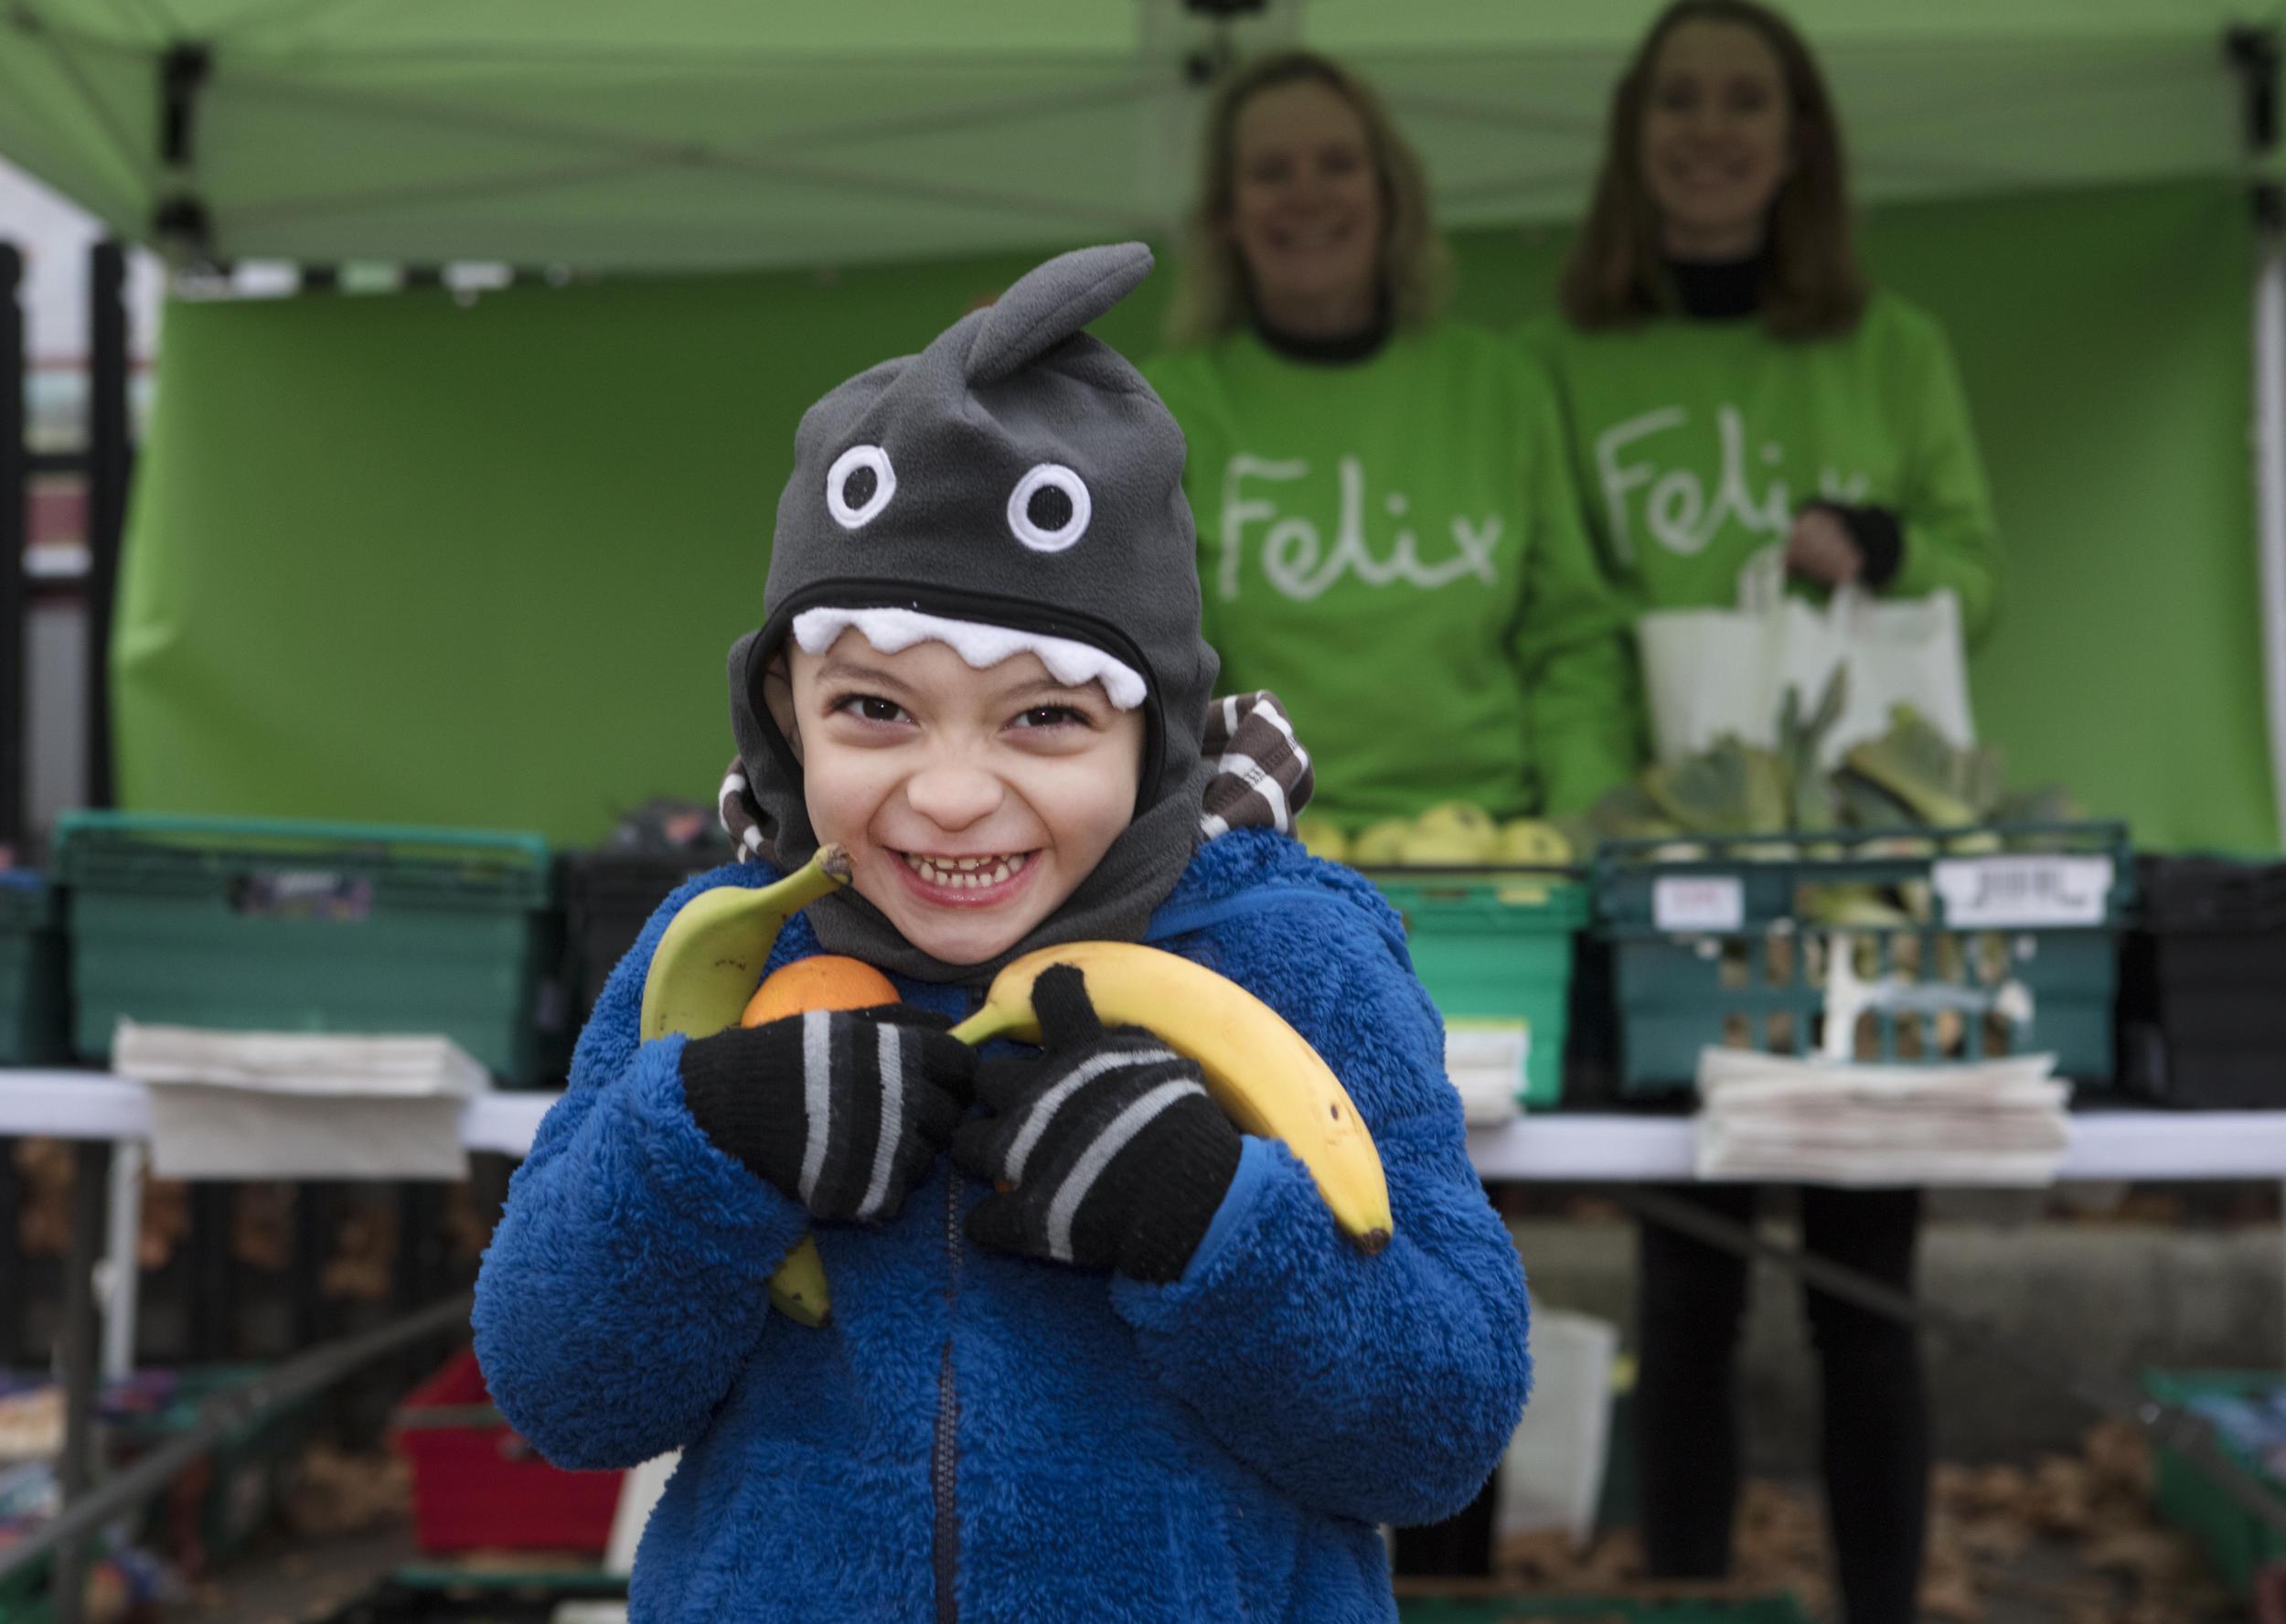 One of the first happy customers at the Felix Project's new market stall at Berrymede Junior School in west London - paid for with the help of your donations